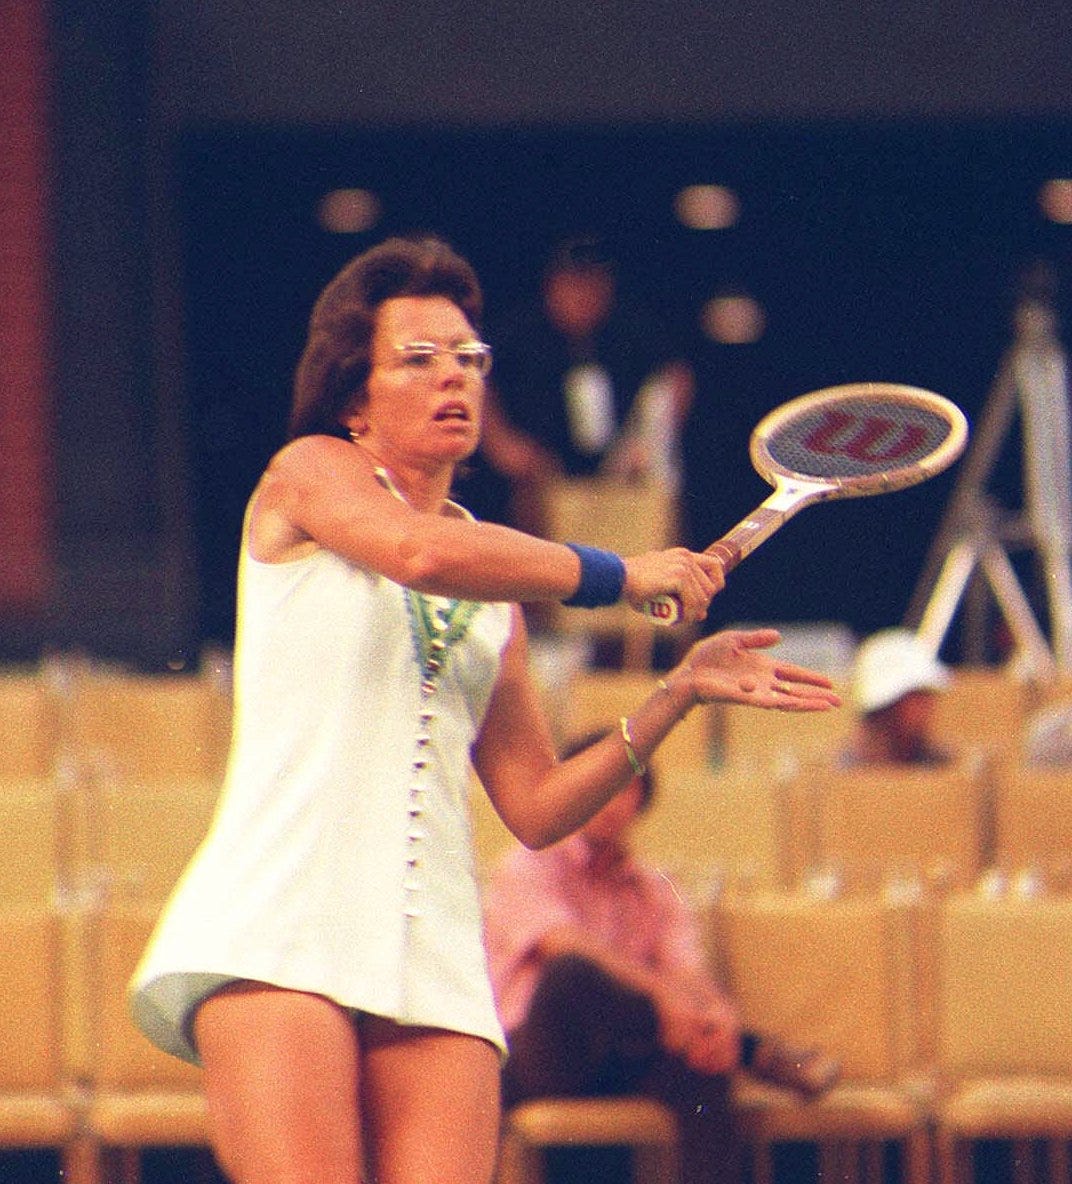 The "Battle of the Sexes" was one of many fights for equality Billie Jean King had on and off the tennis court.